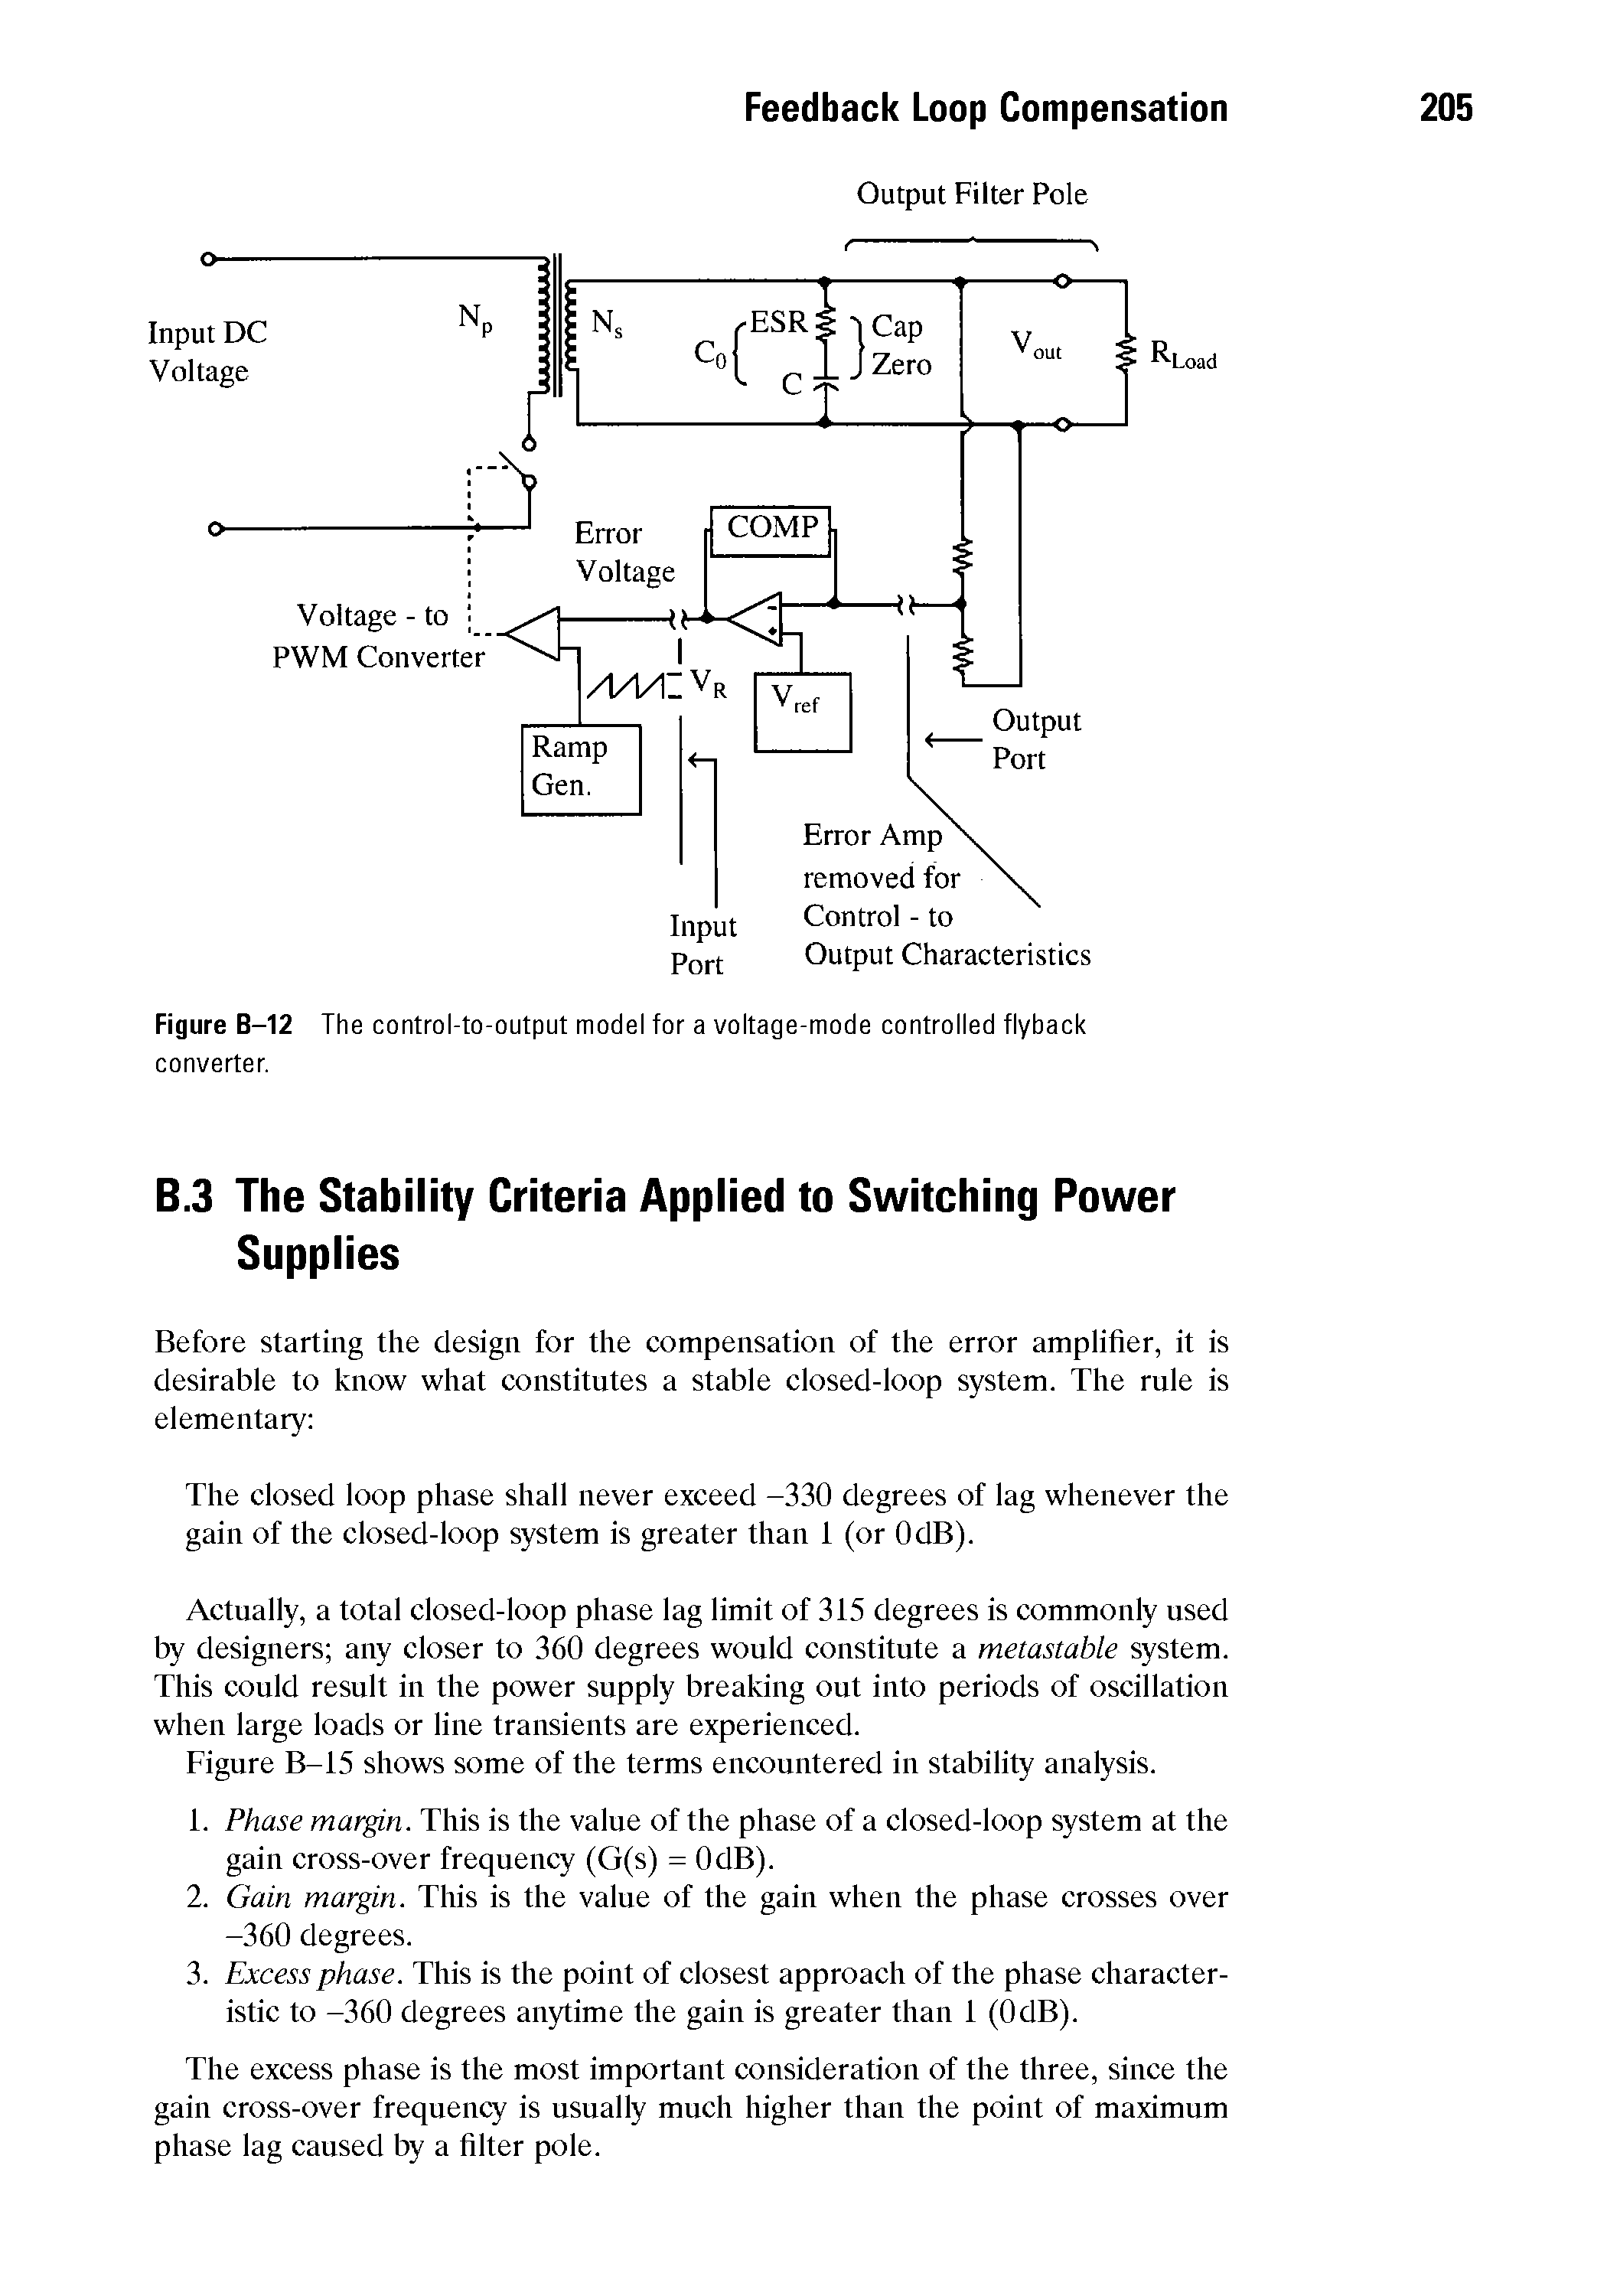 Figure B-12 The control-to-output model for a voltage-mode controlled flyback converter.